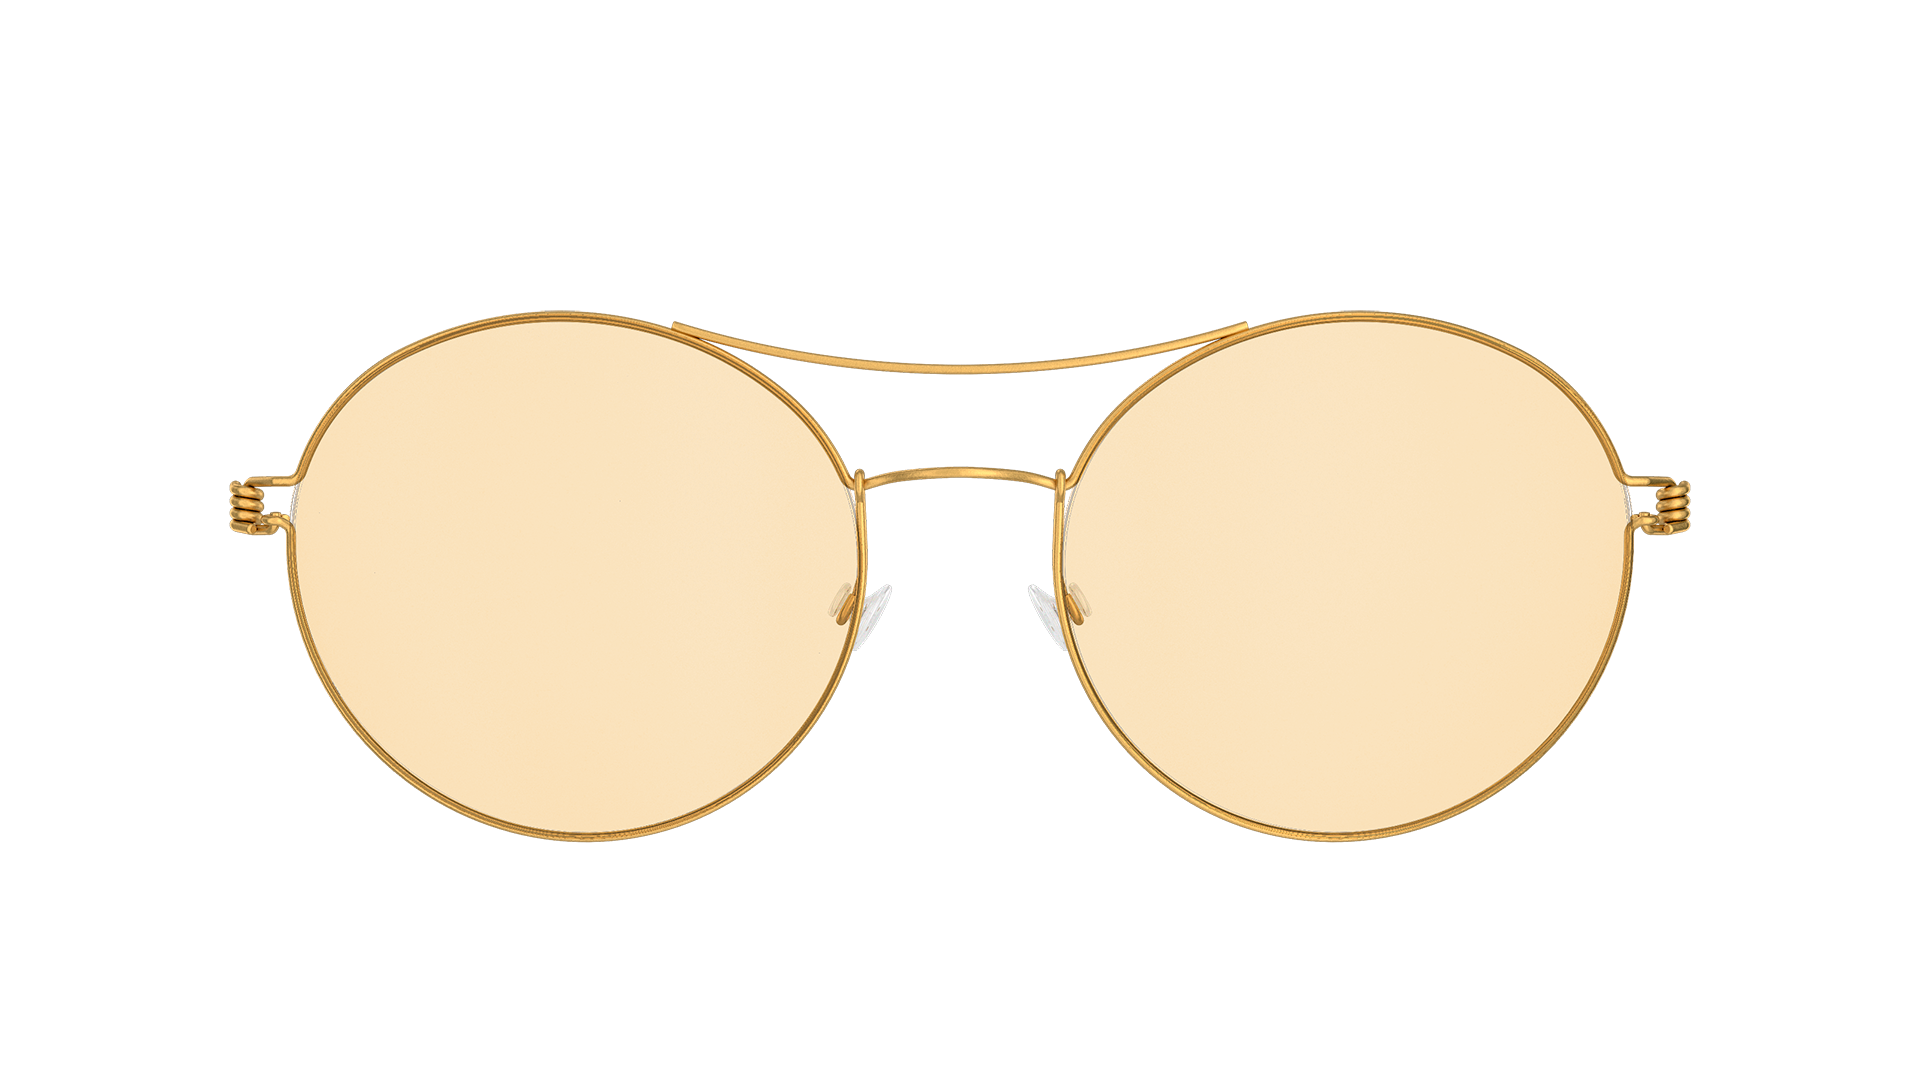 LINDBERG rim Model 8202 GT gold tone round sunglasses with gold reflective lenses